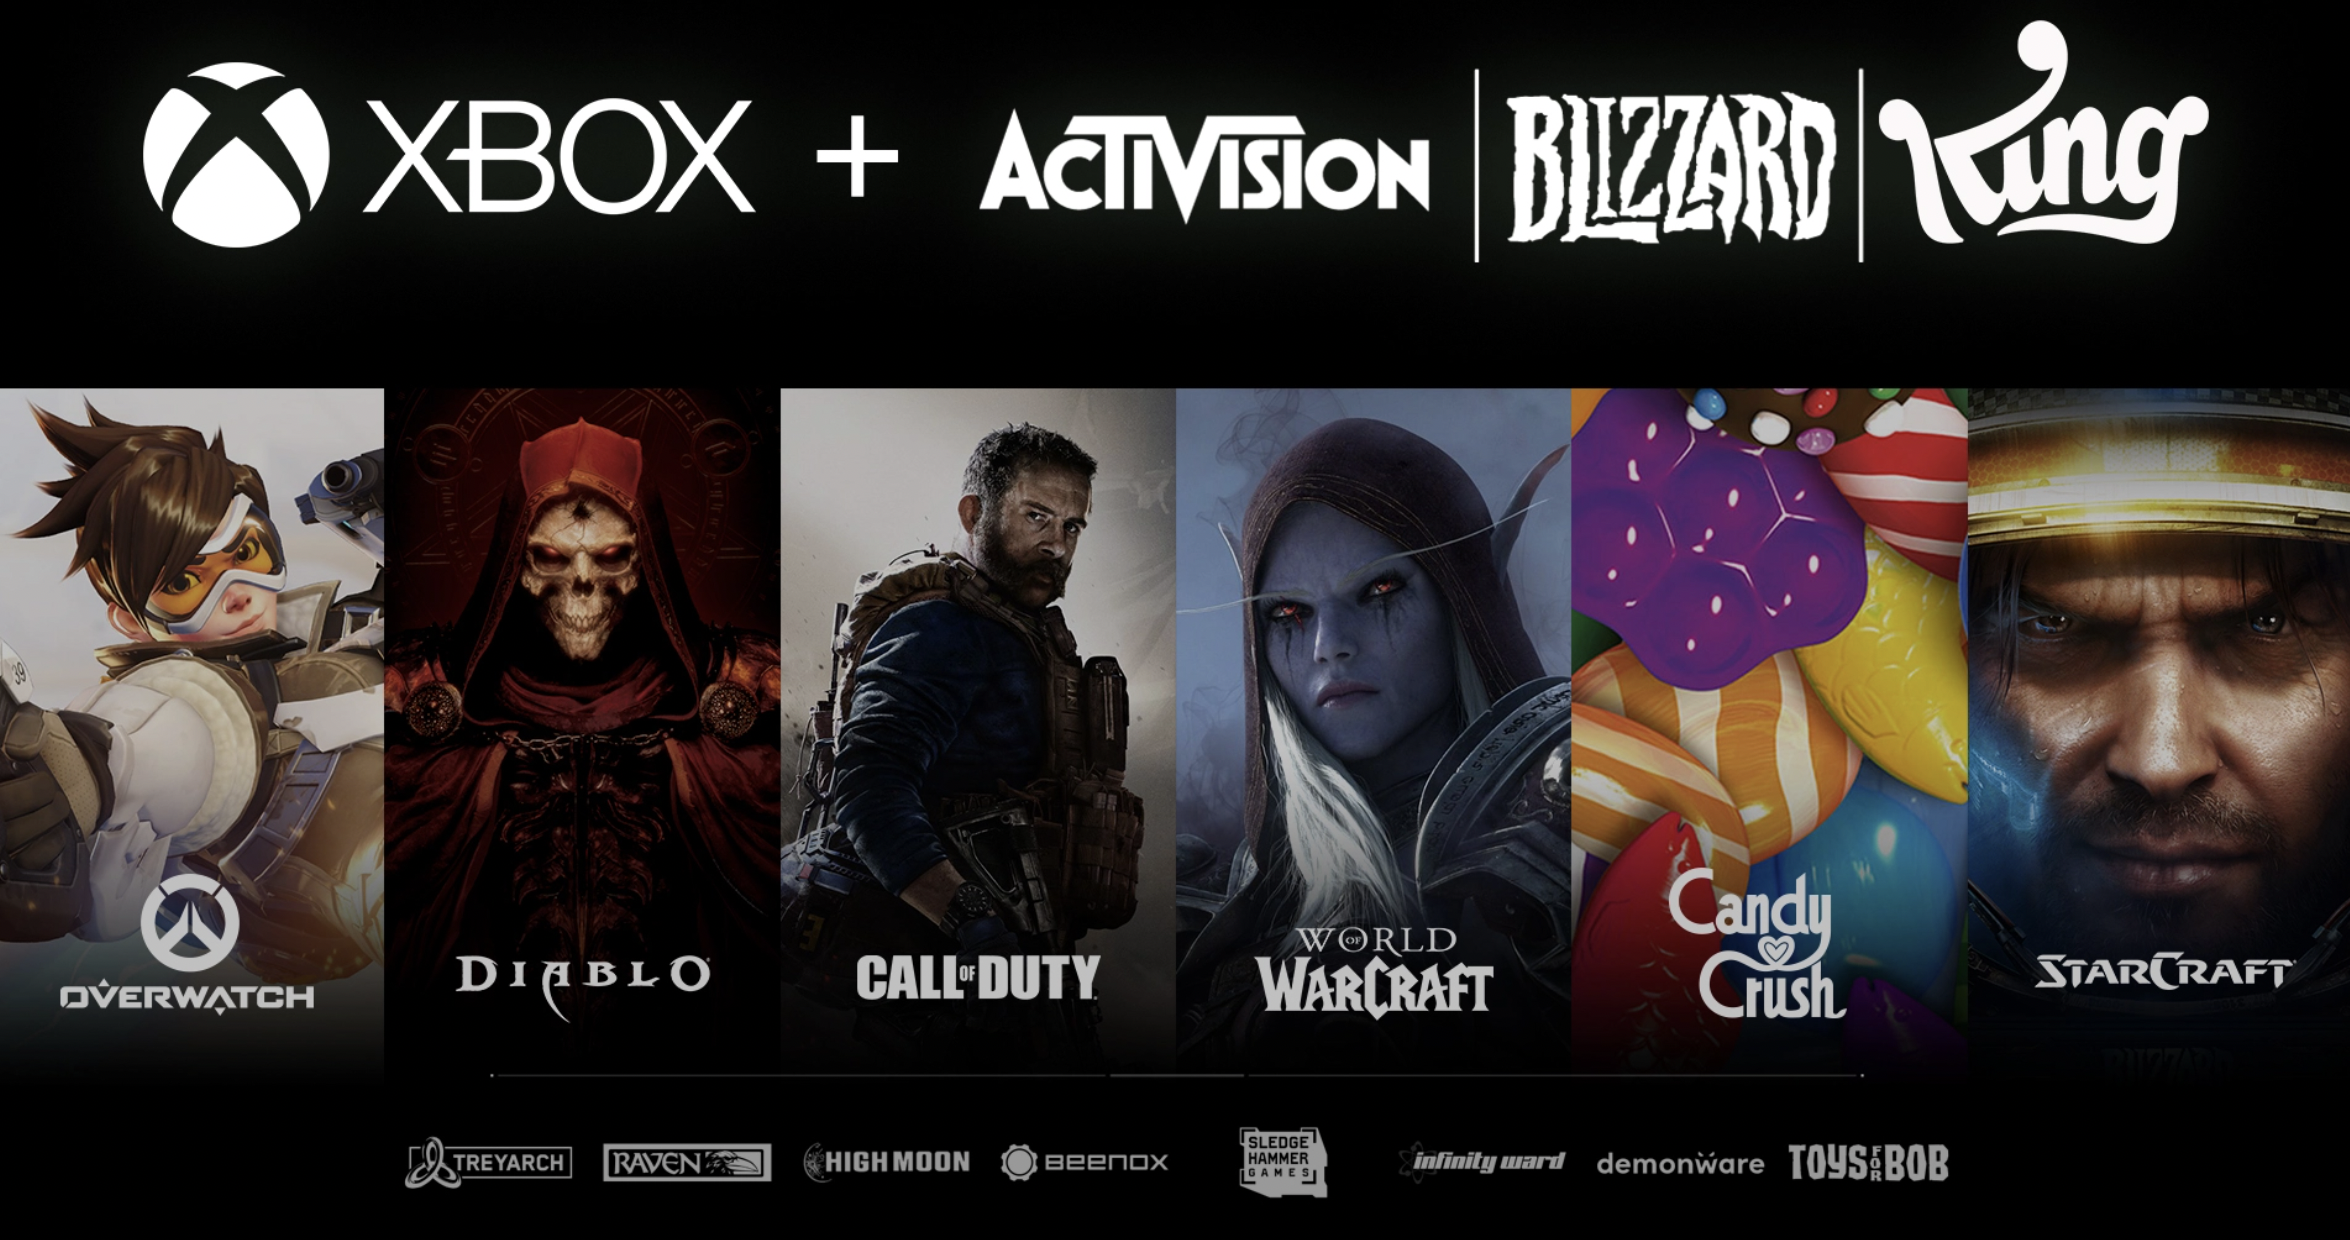 Xbox Welcomes Activision to the family, along with all under the Activision Umbrella.